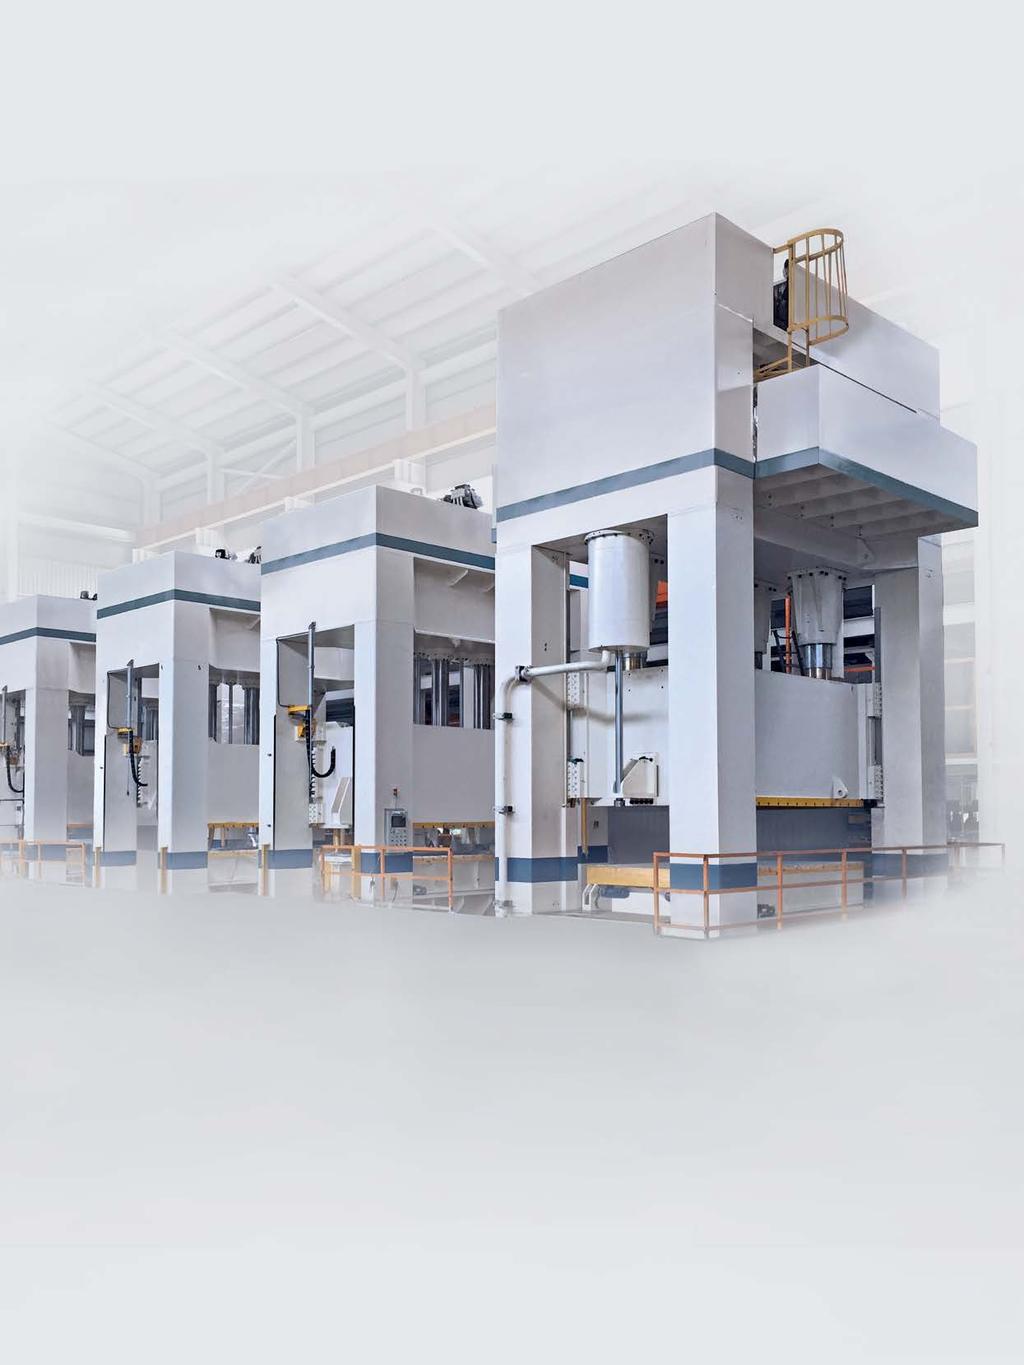 The automation solution for your press Compared with conventional hydraulic or mechanic presses, servo presses provide considerable advantages, such as increased productivity and product quality.